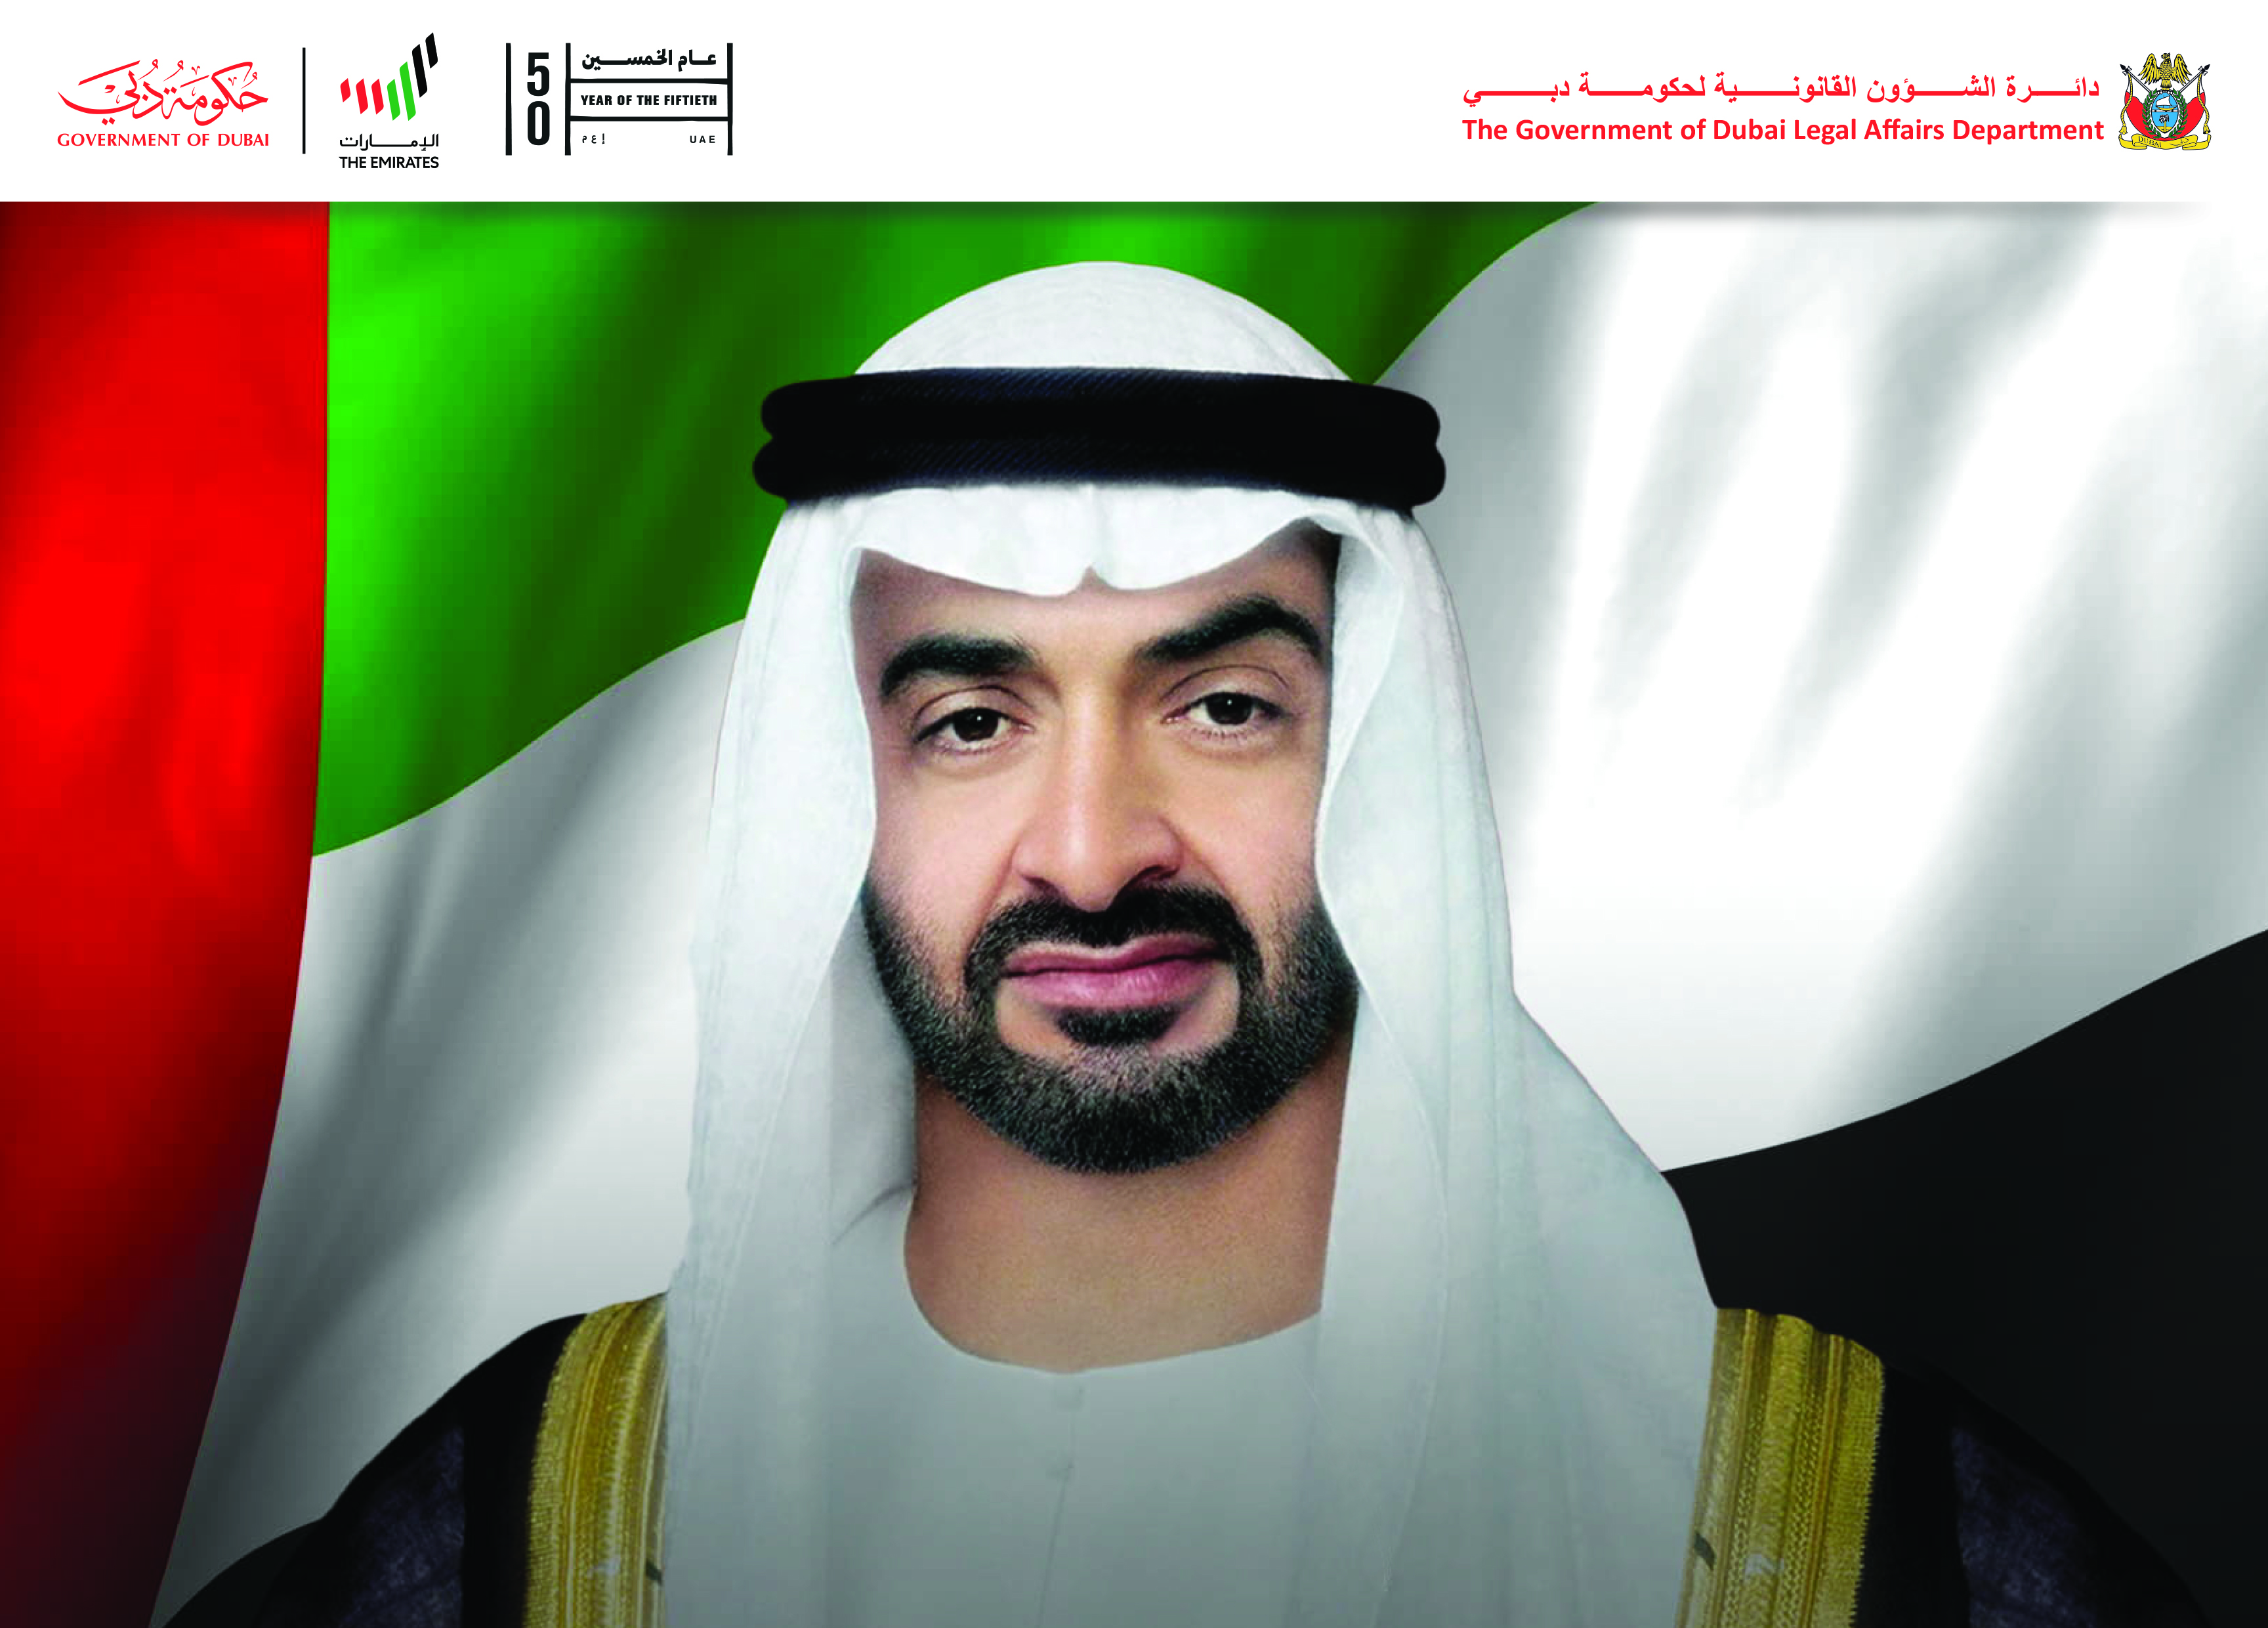 Words of His Excellency the Director General of the Government of Dubai Legal Affairs Department  On on the Speech of His Highness the President of the UAE